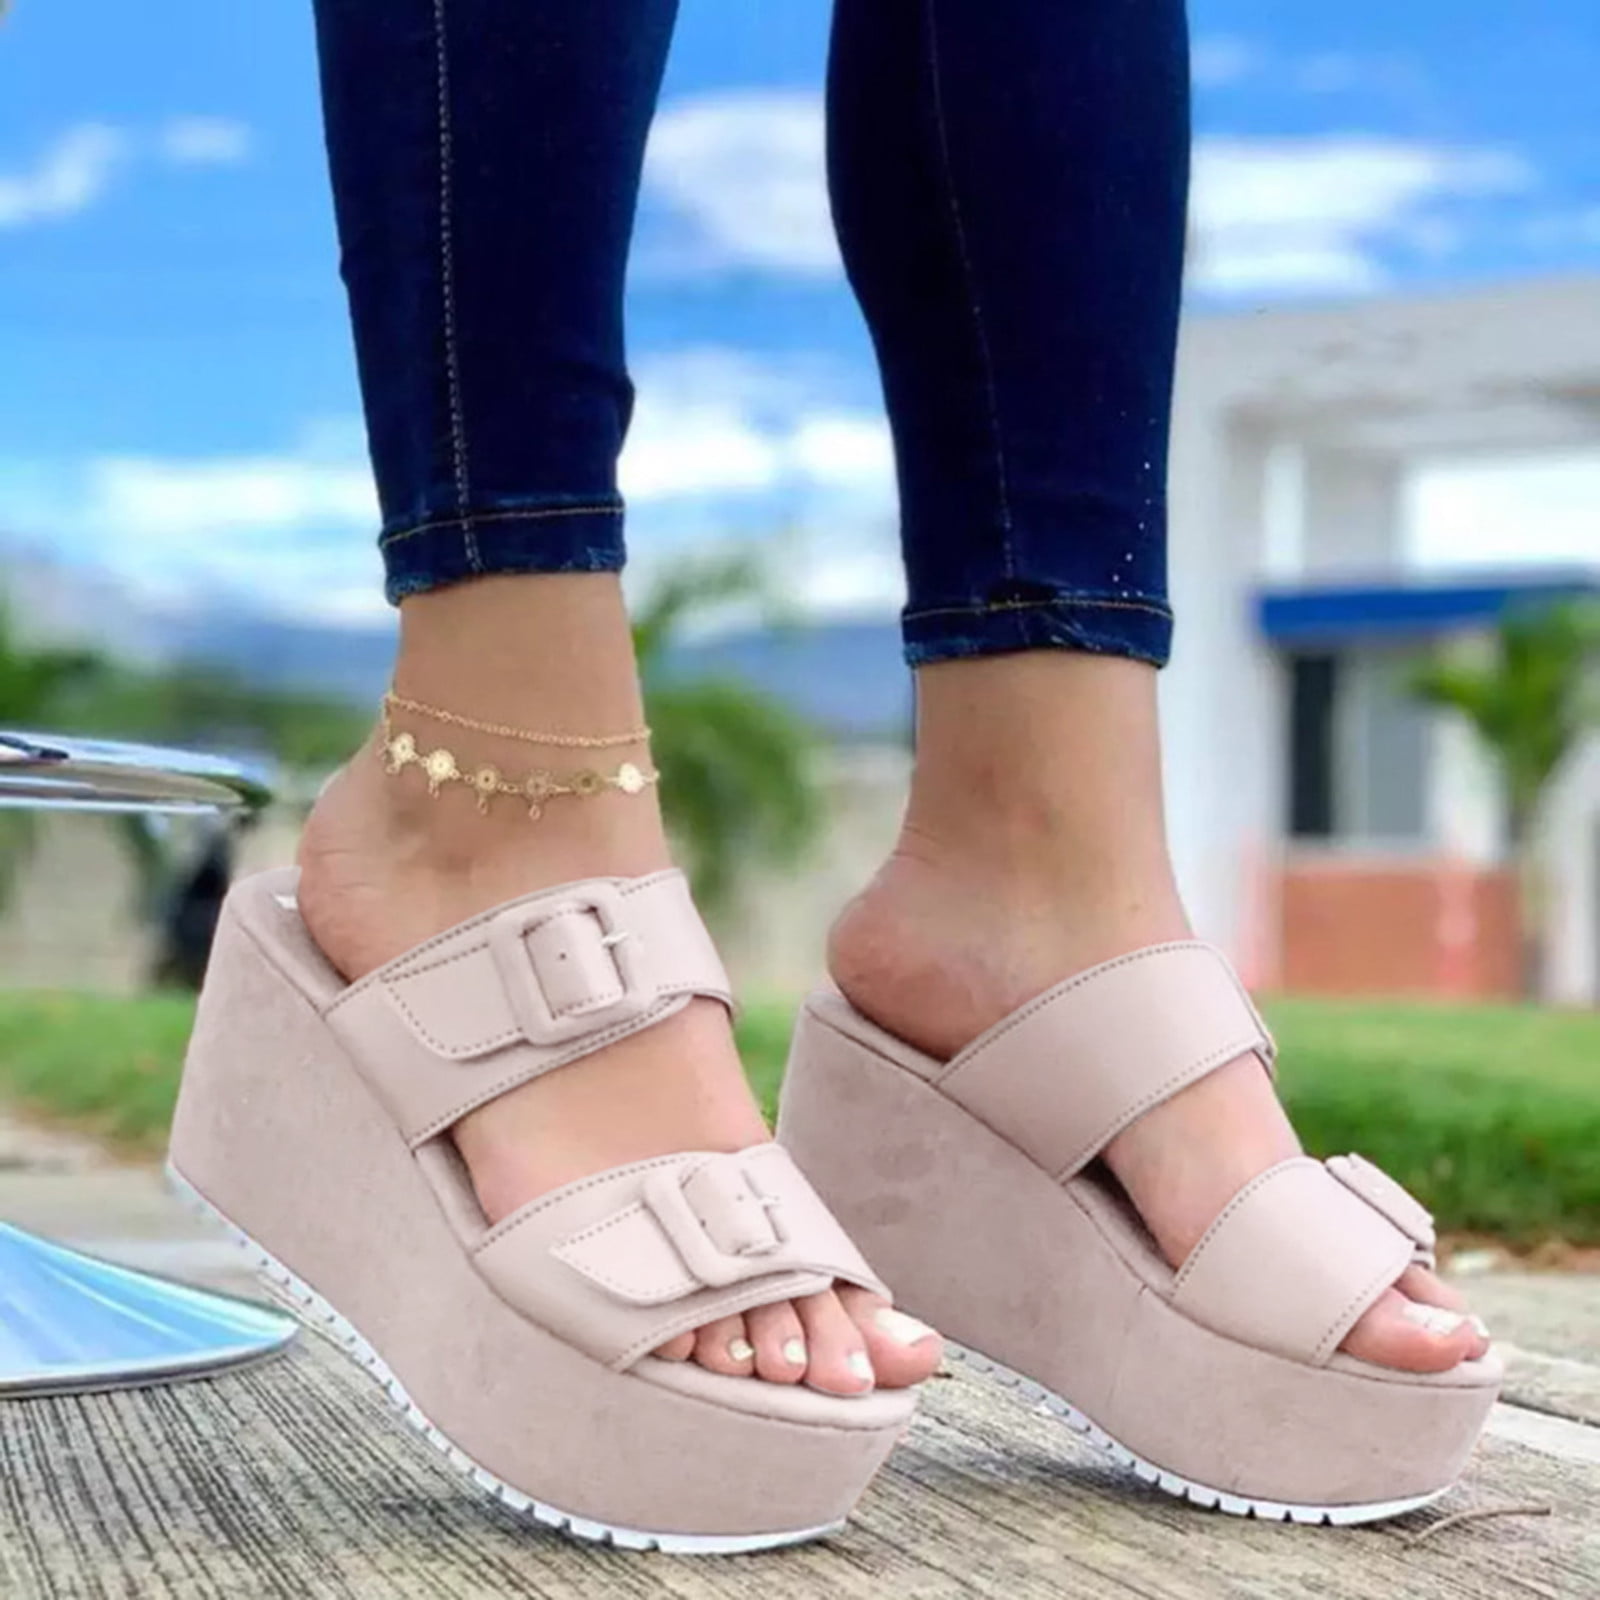 Wedge Sandals for Women,Wedge Sneakers for Women Fashion High Top Hidden Heel Shoes Retro Wedge Ankle Buckle Sandal 